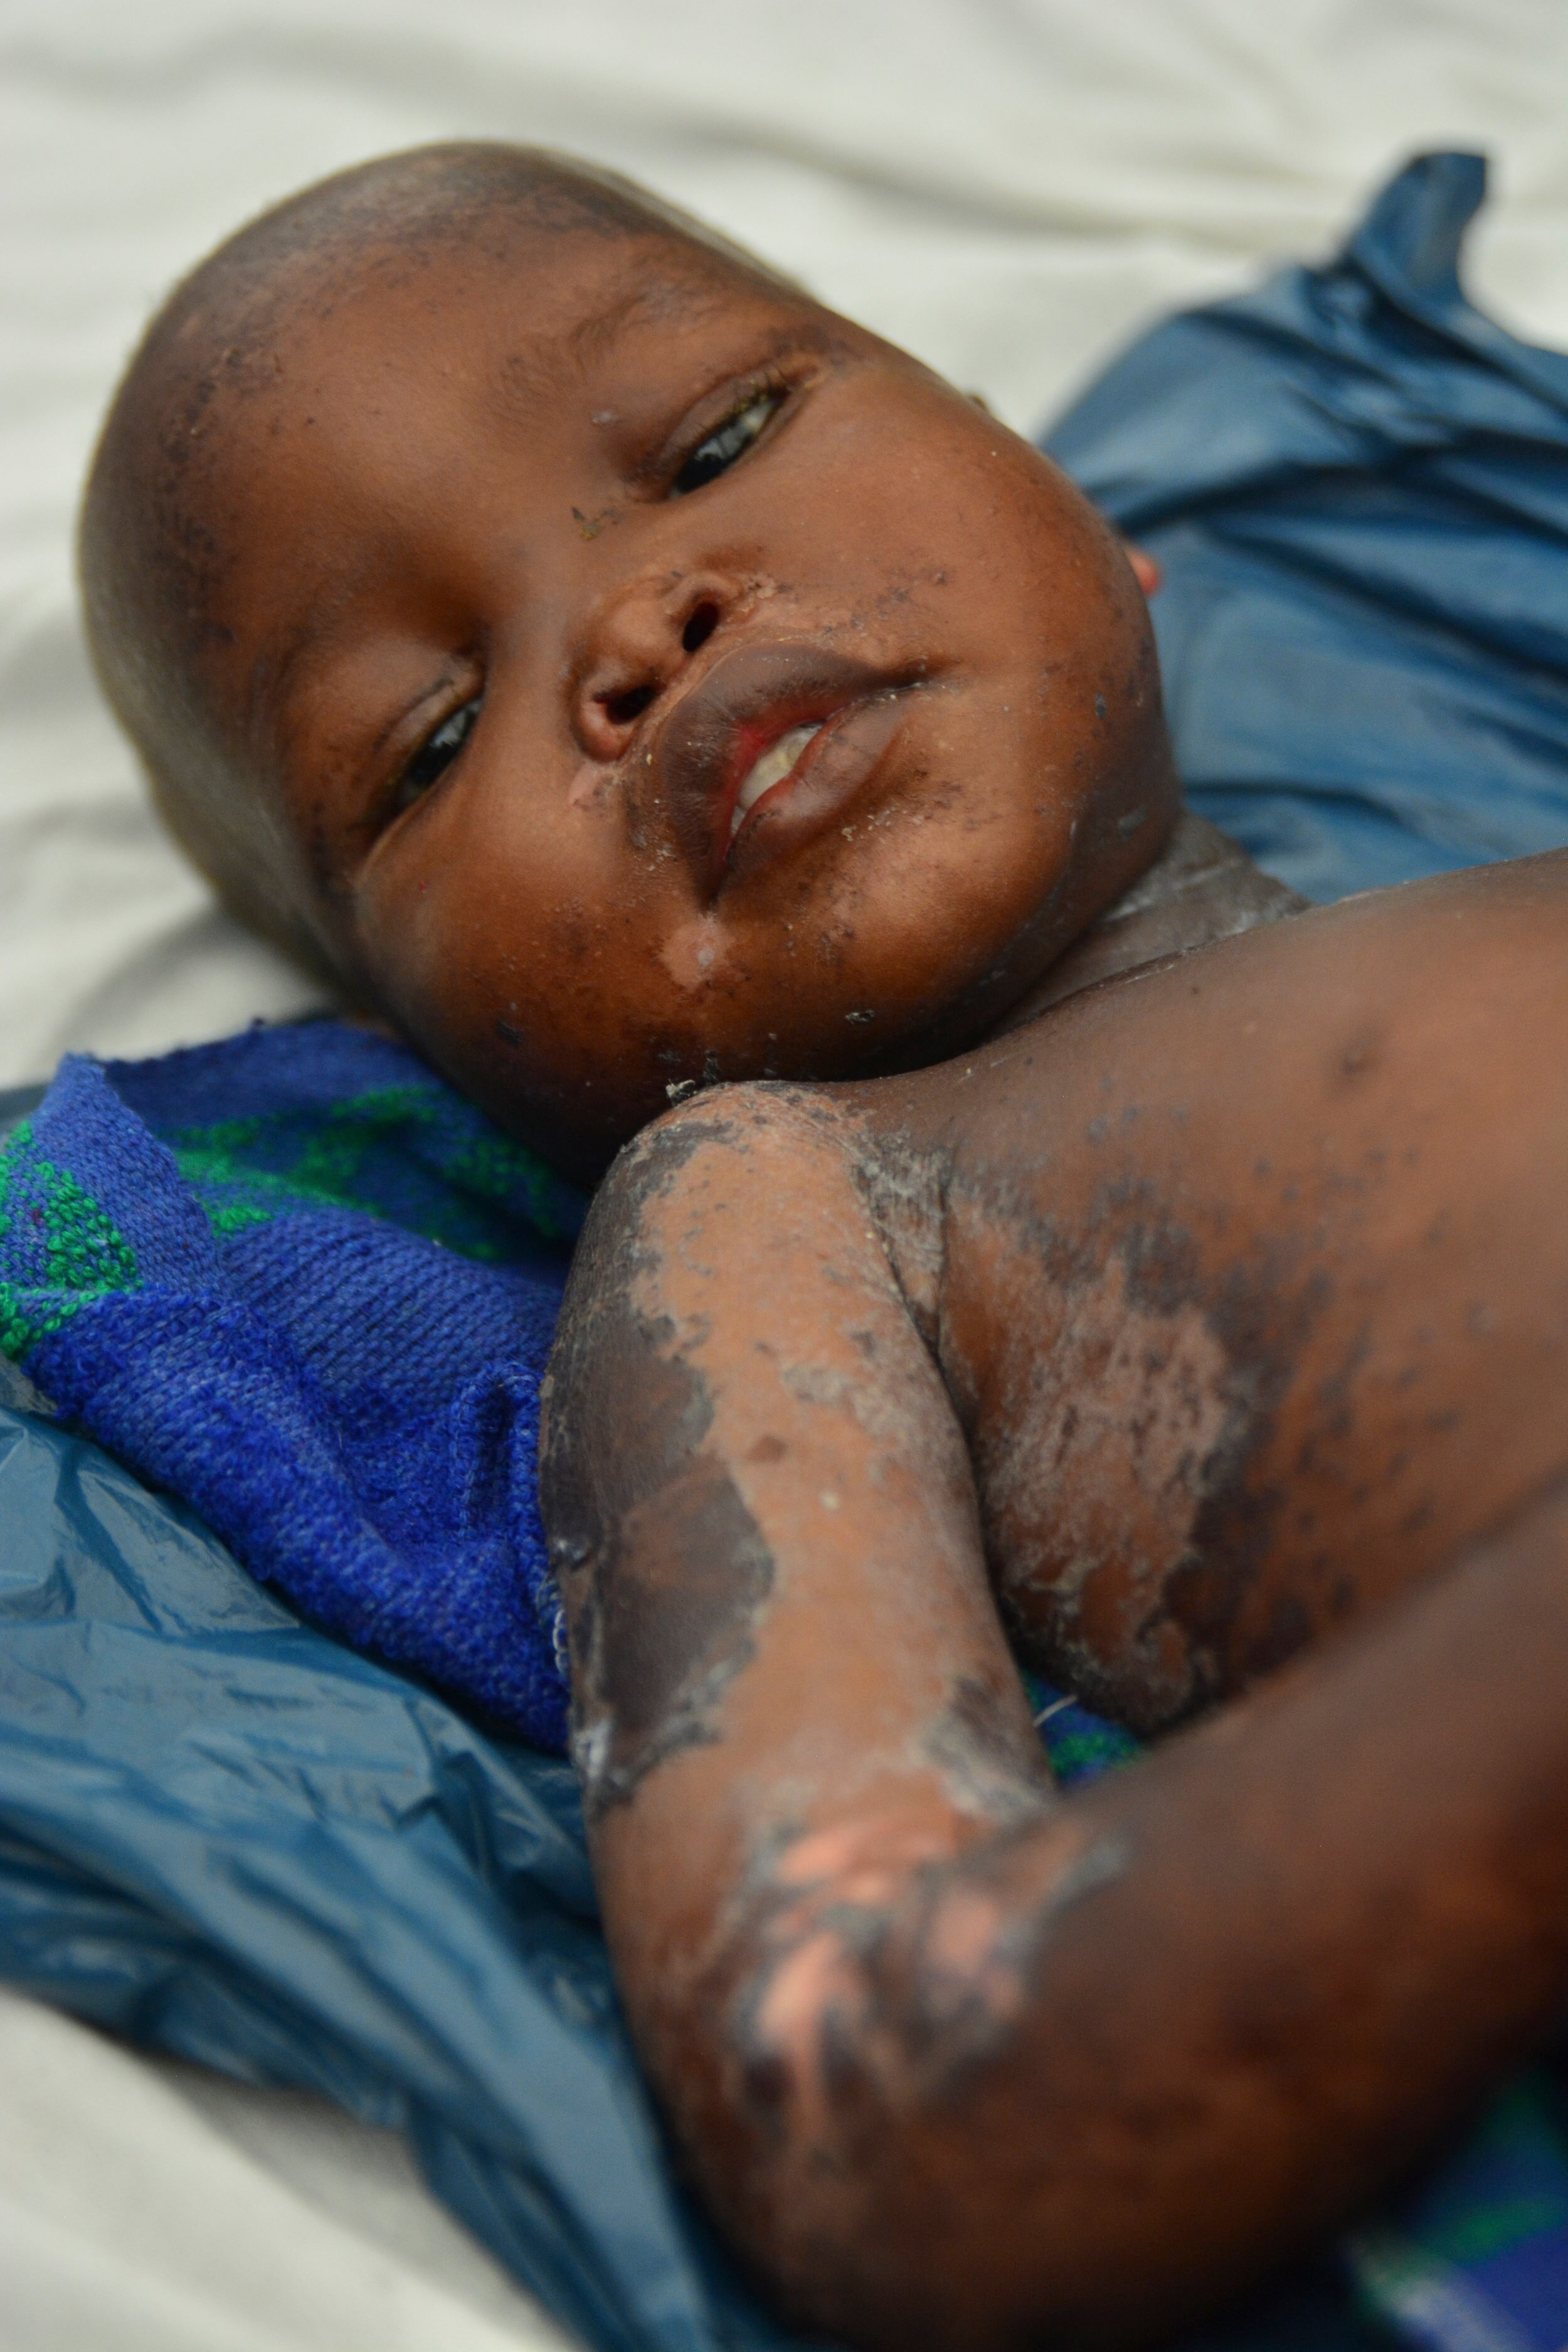  The most severe cases of malnutrition are treated in the Doctors Without Borders facility at the UNMISS base in Malakal. Children here are affected by a specific type of malnutrition called Kwashiorkor. Symptoms include distended bellies, ulcers, an